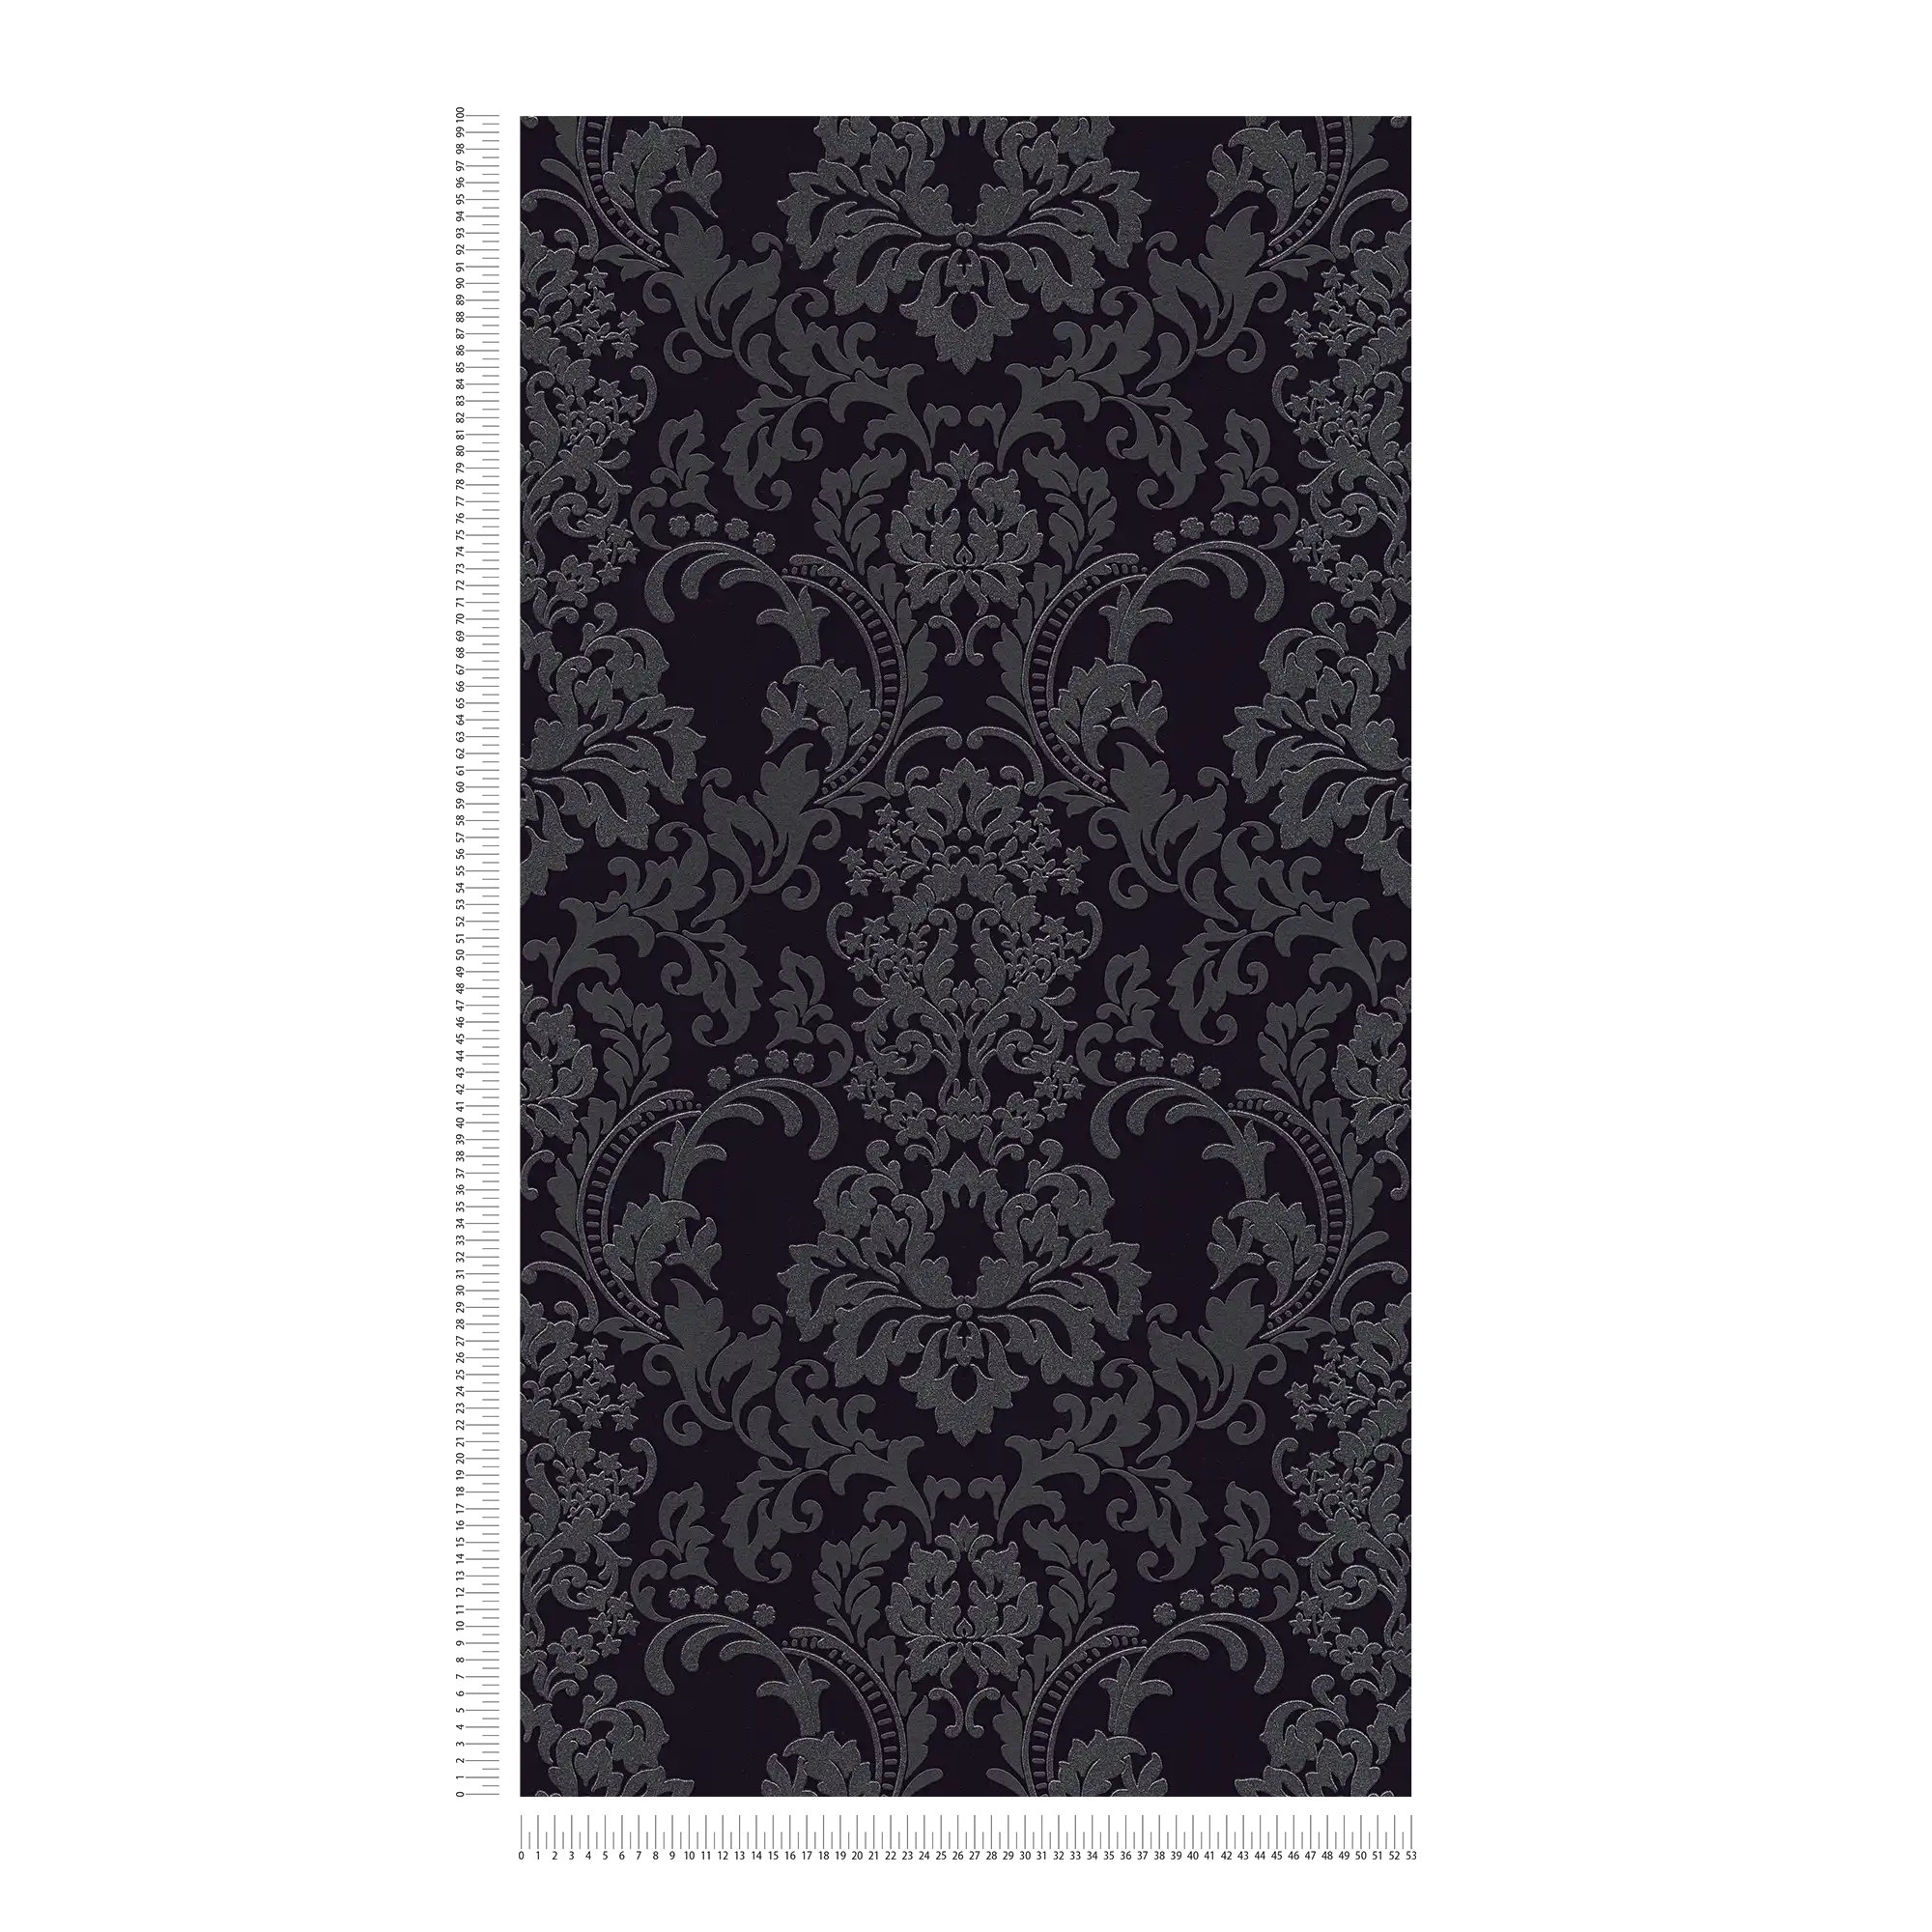             Baroque wallpaper with glitter effect - black
        